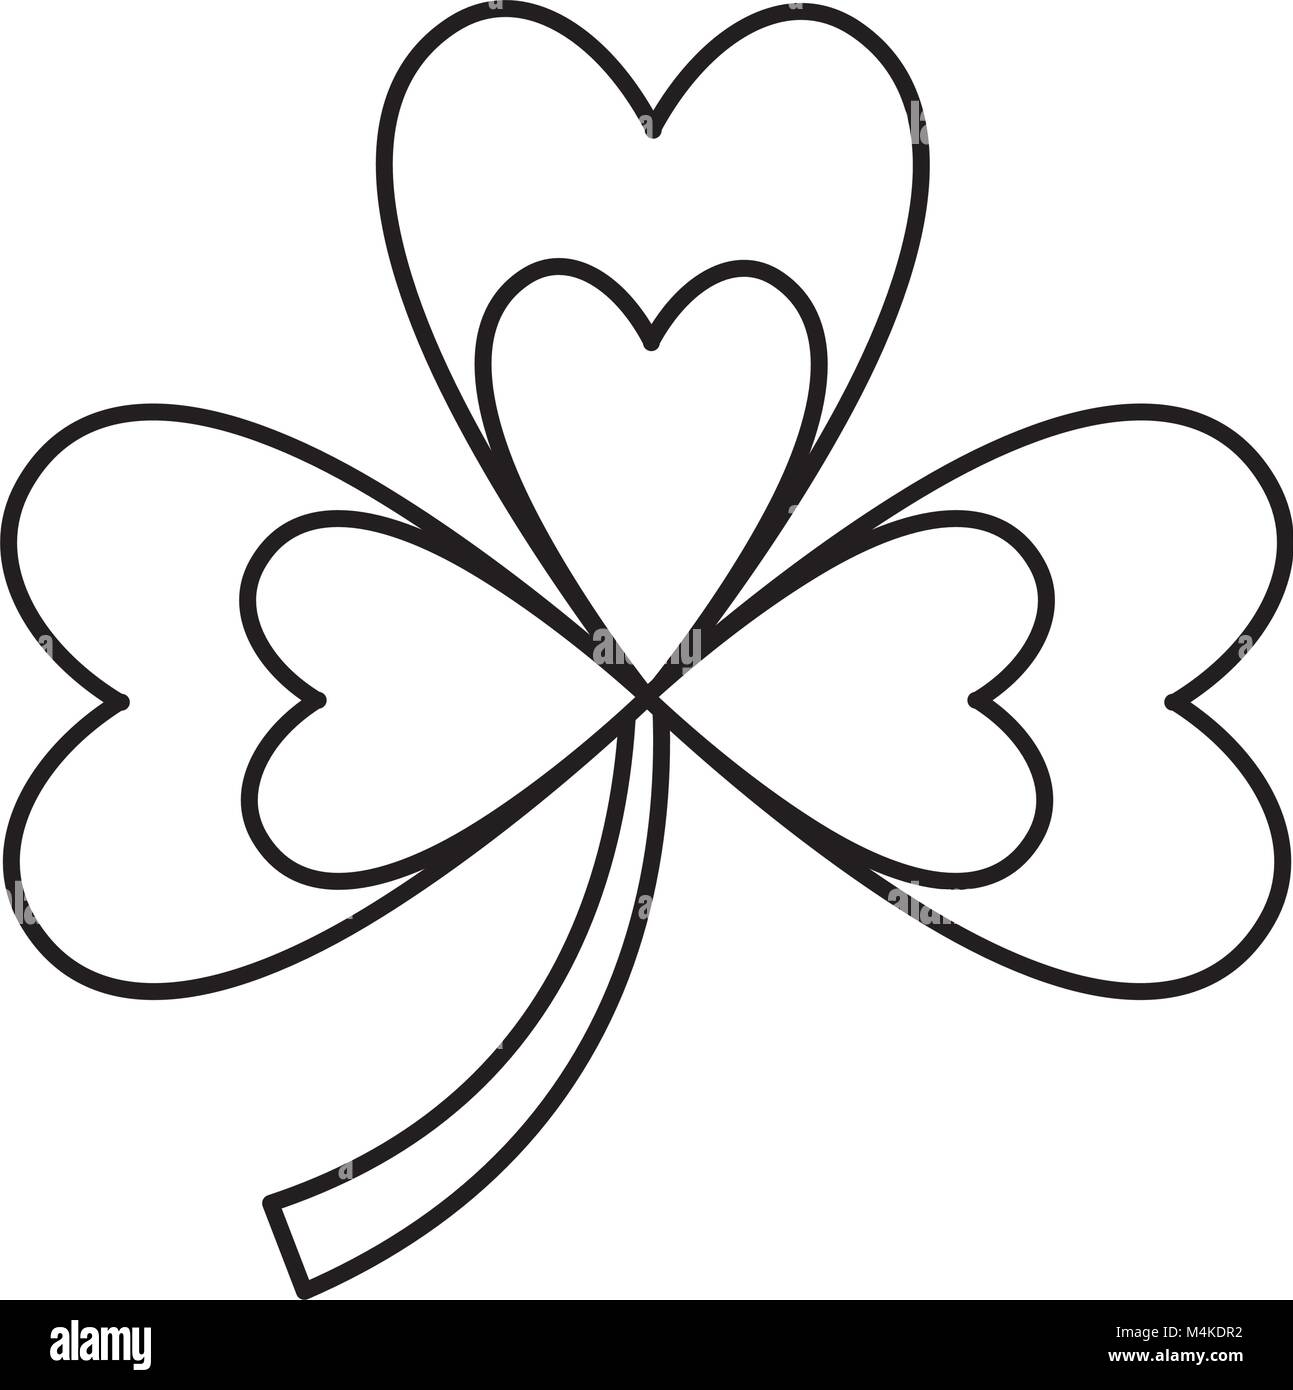 Three leaf clover black and white stock photos images